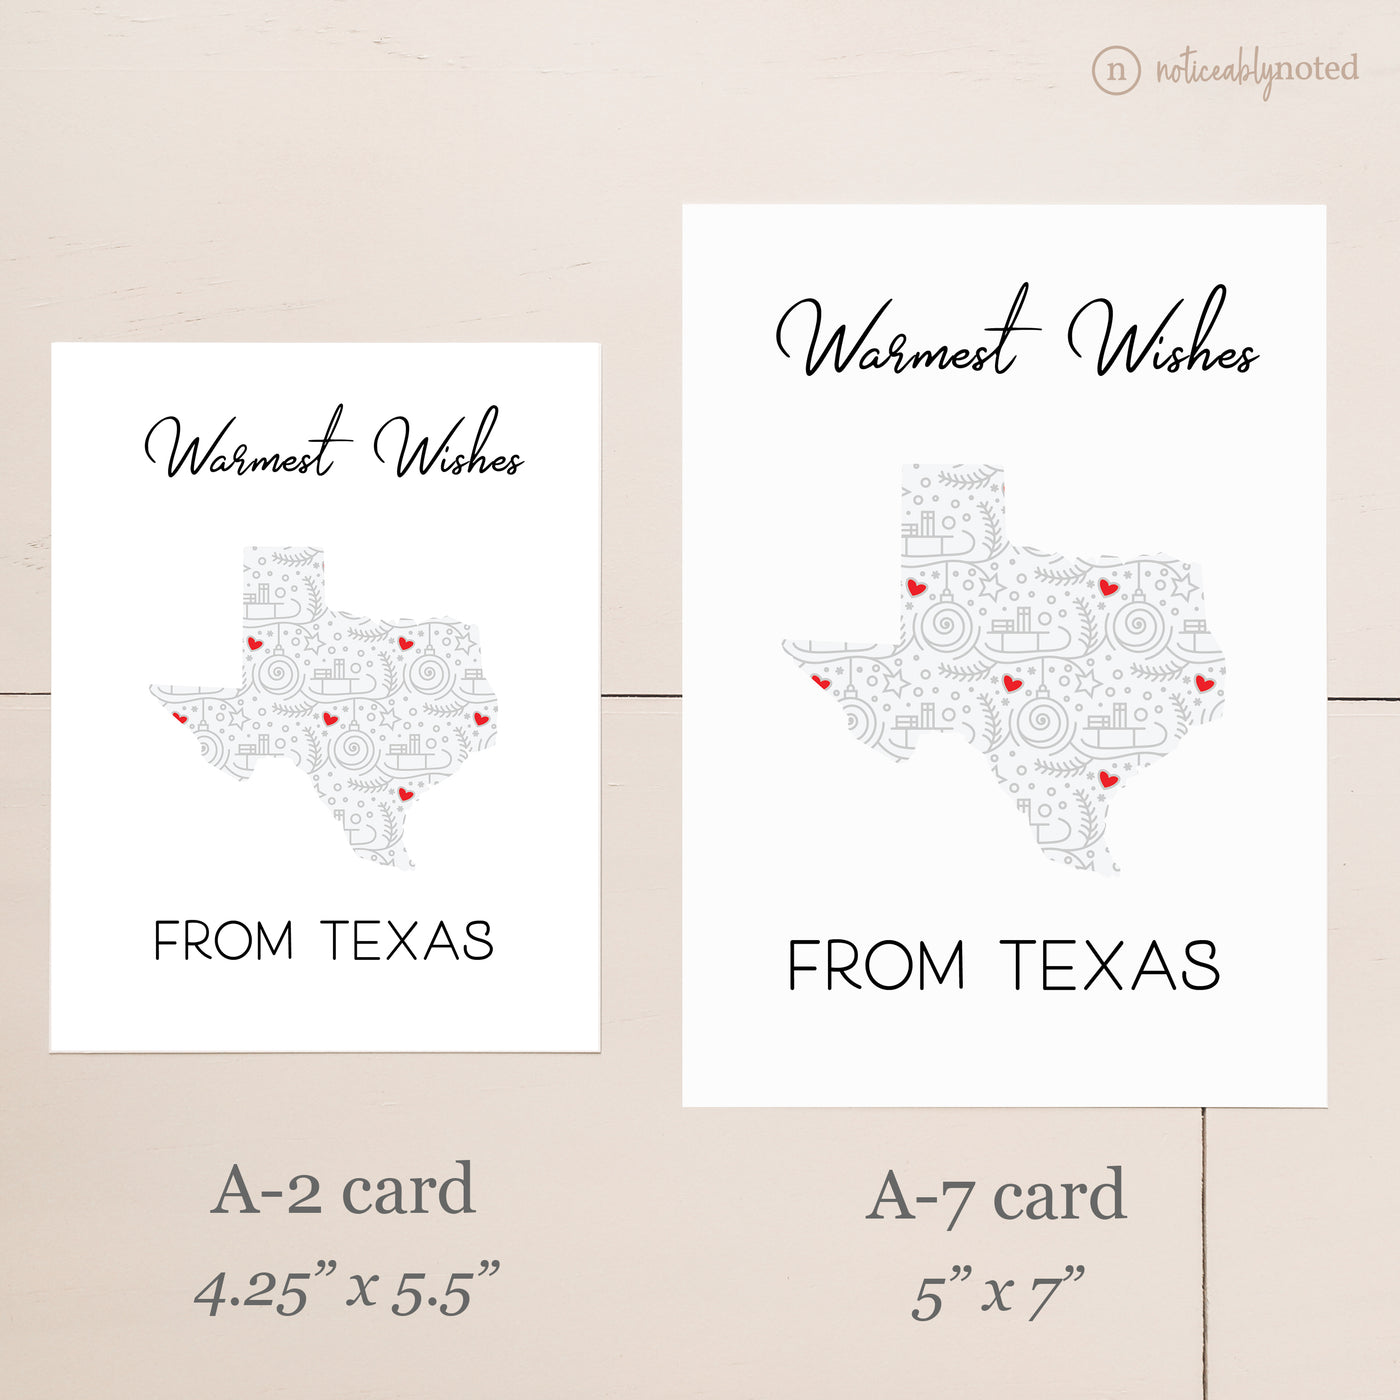 Texas Christmas Card - Card Comparison | Noticeably Noted